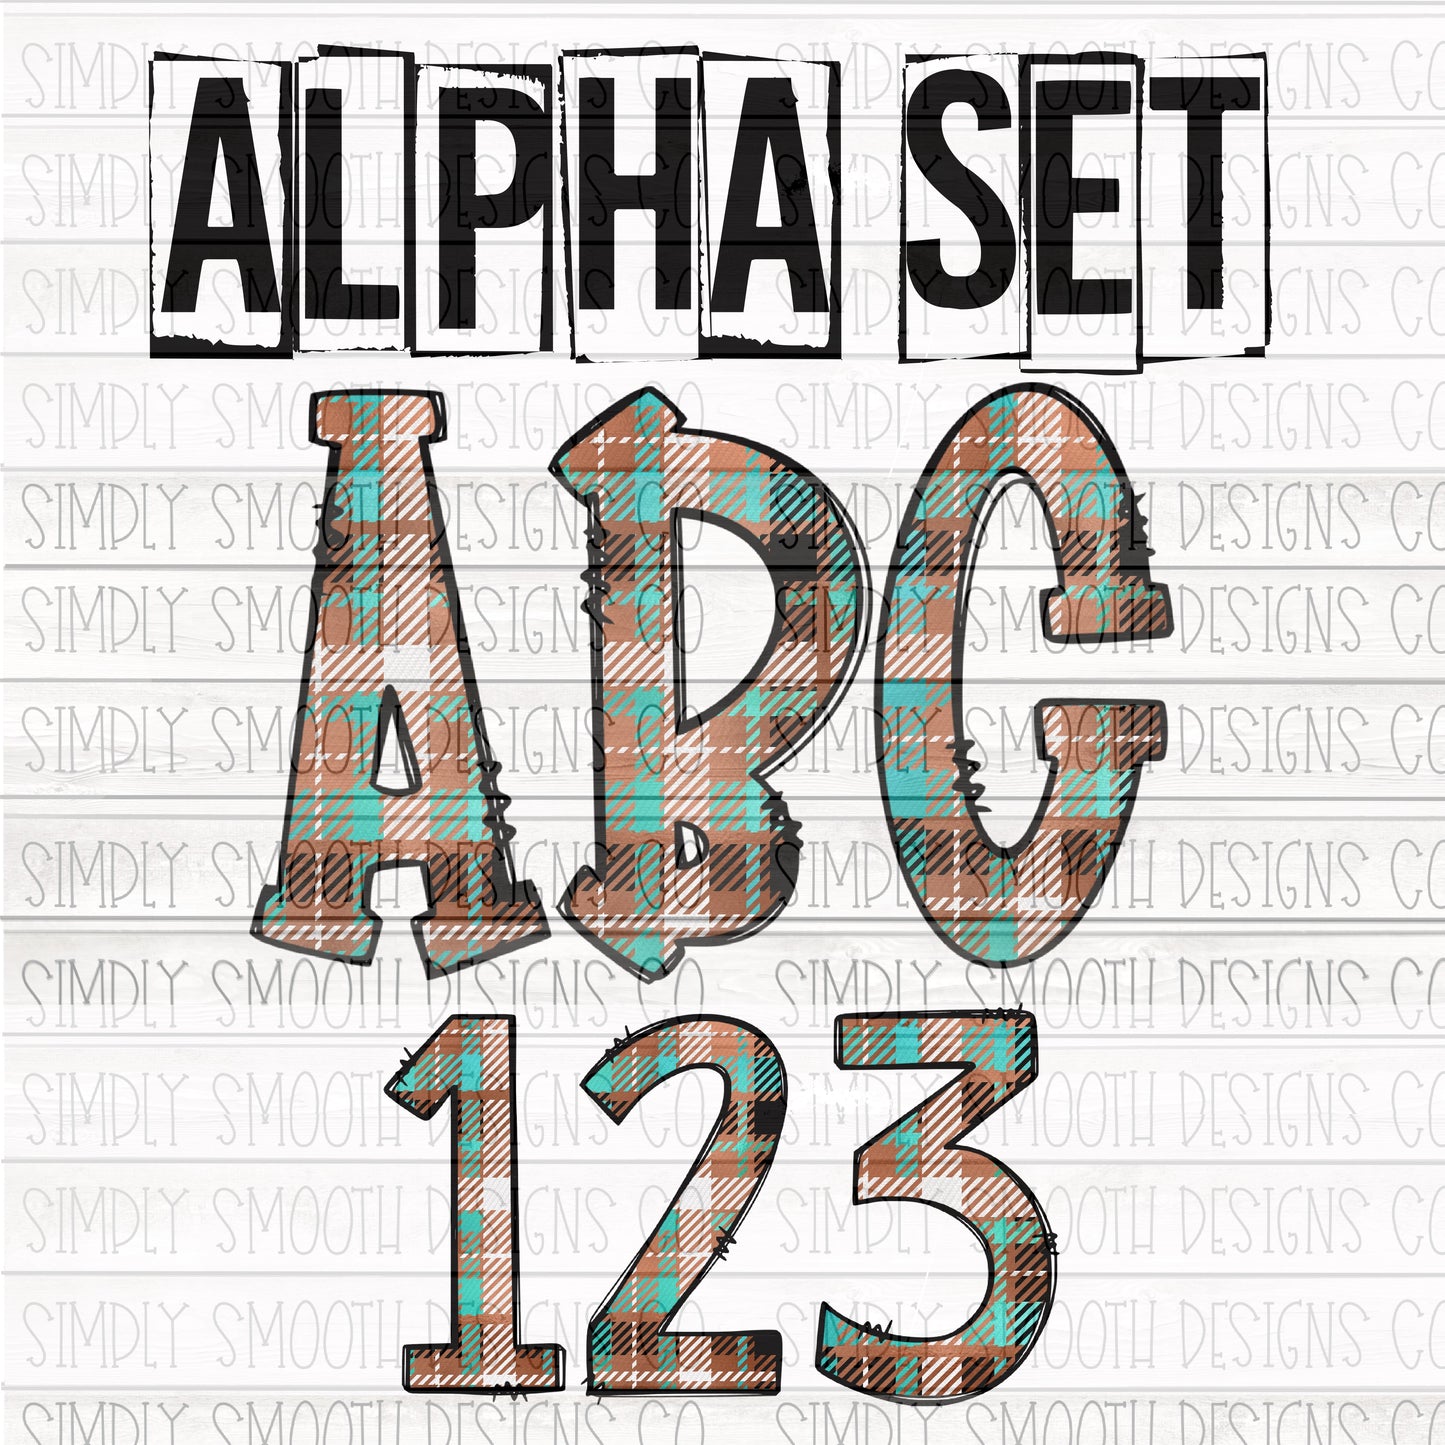 Brown Teal Plaid Alpha and number set. 36 total files